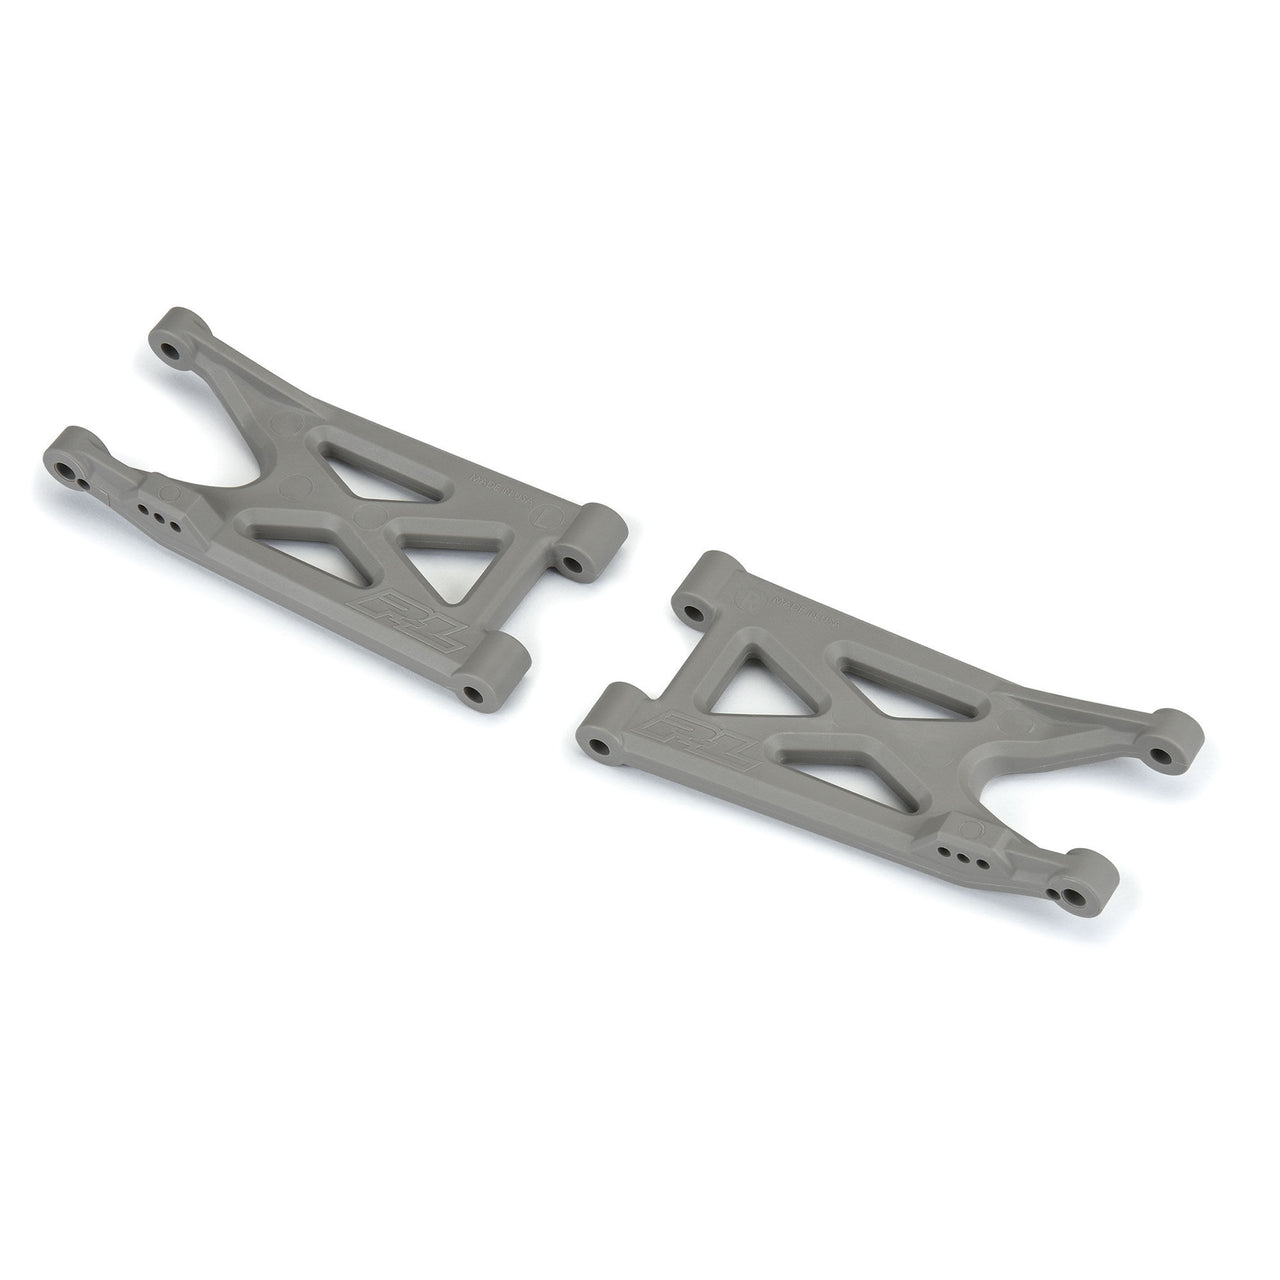 PRO640005 Bash Armor Rear Suspension Arms (Stone Gray) for ARRMA 3S Vehicles